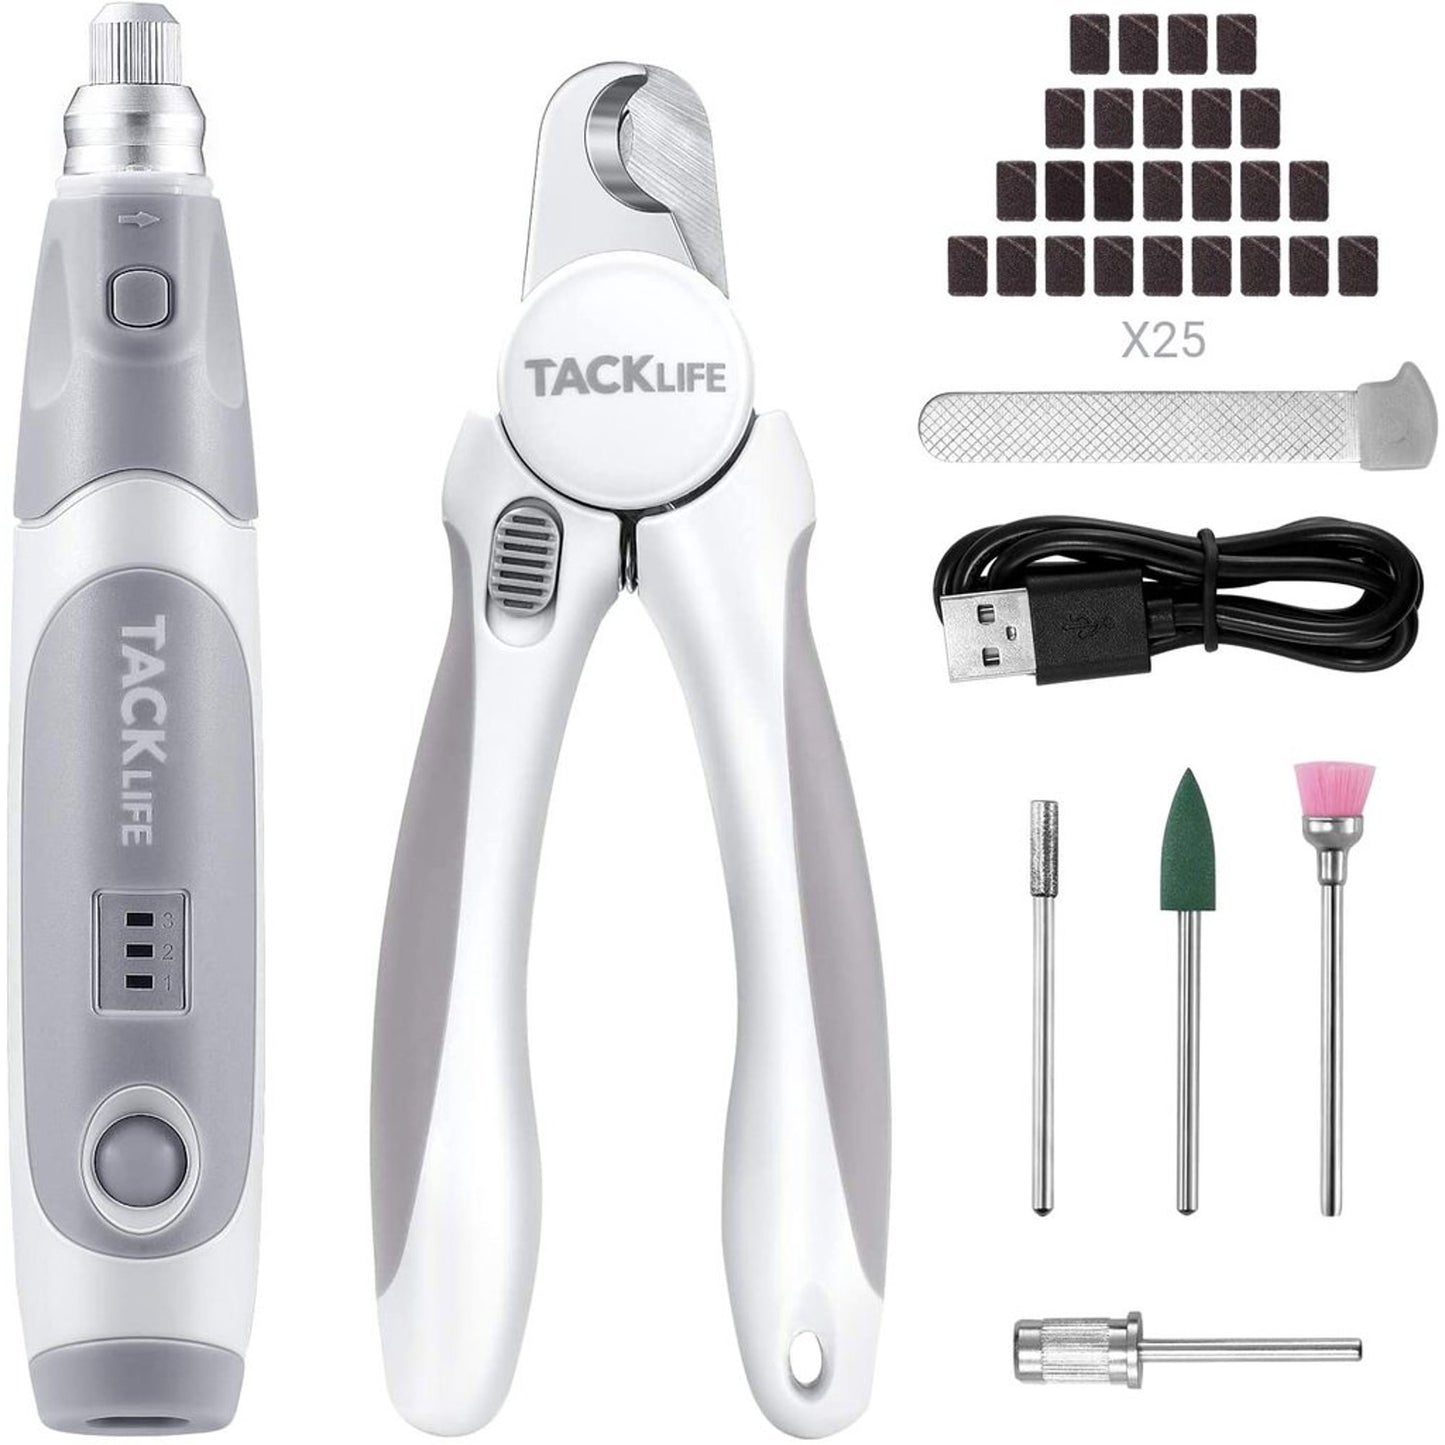 TACKLIFE TKRT20D Dog Nail Clipper with Grinder, 3-Speed Electric Rechargeable Pet Nail Trimmer